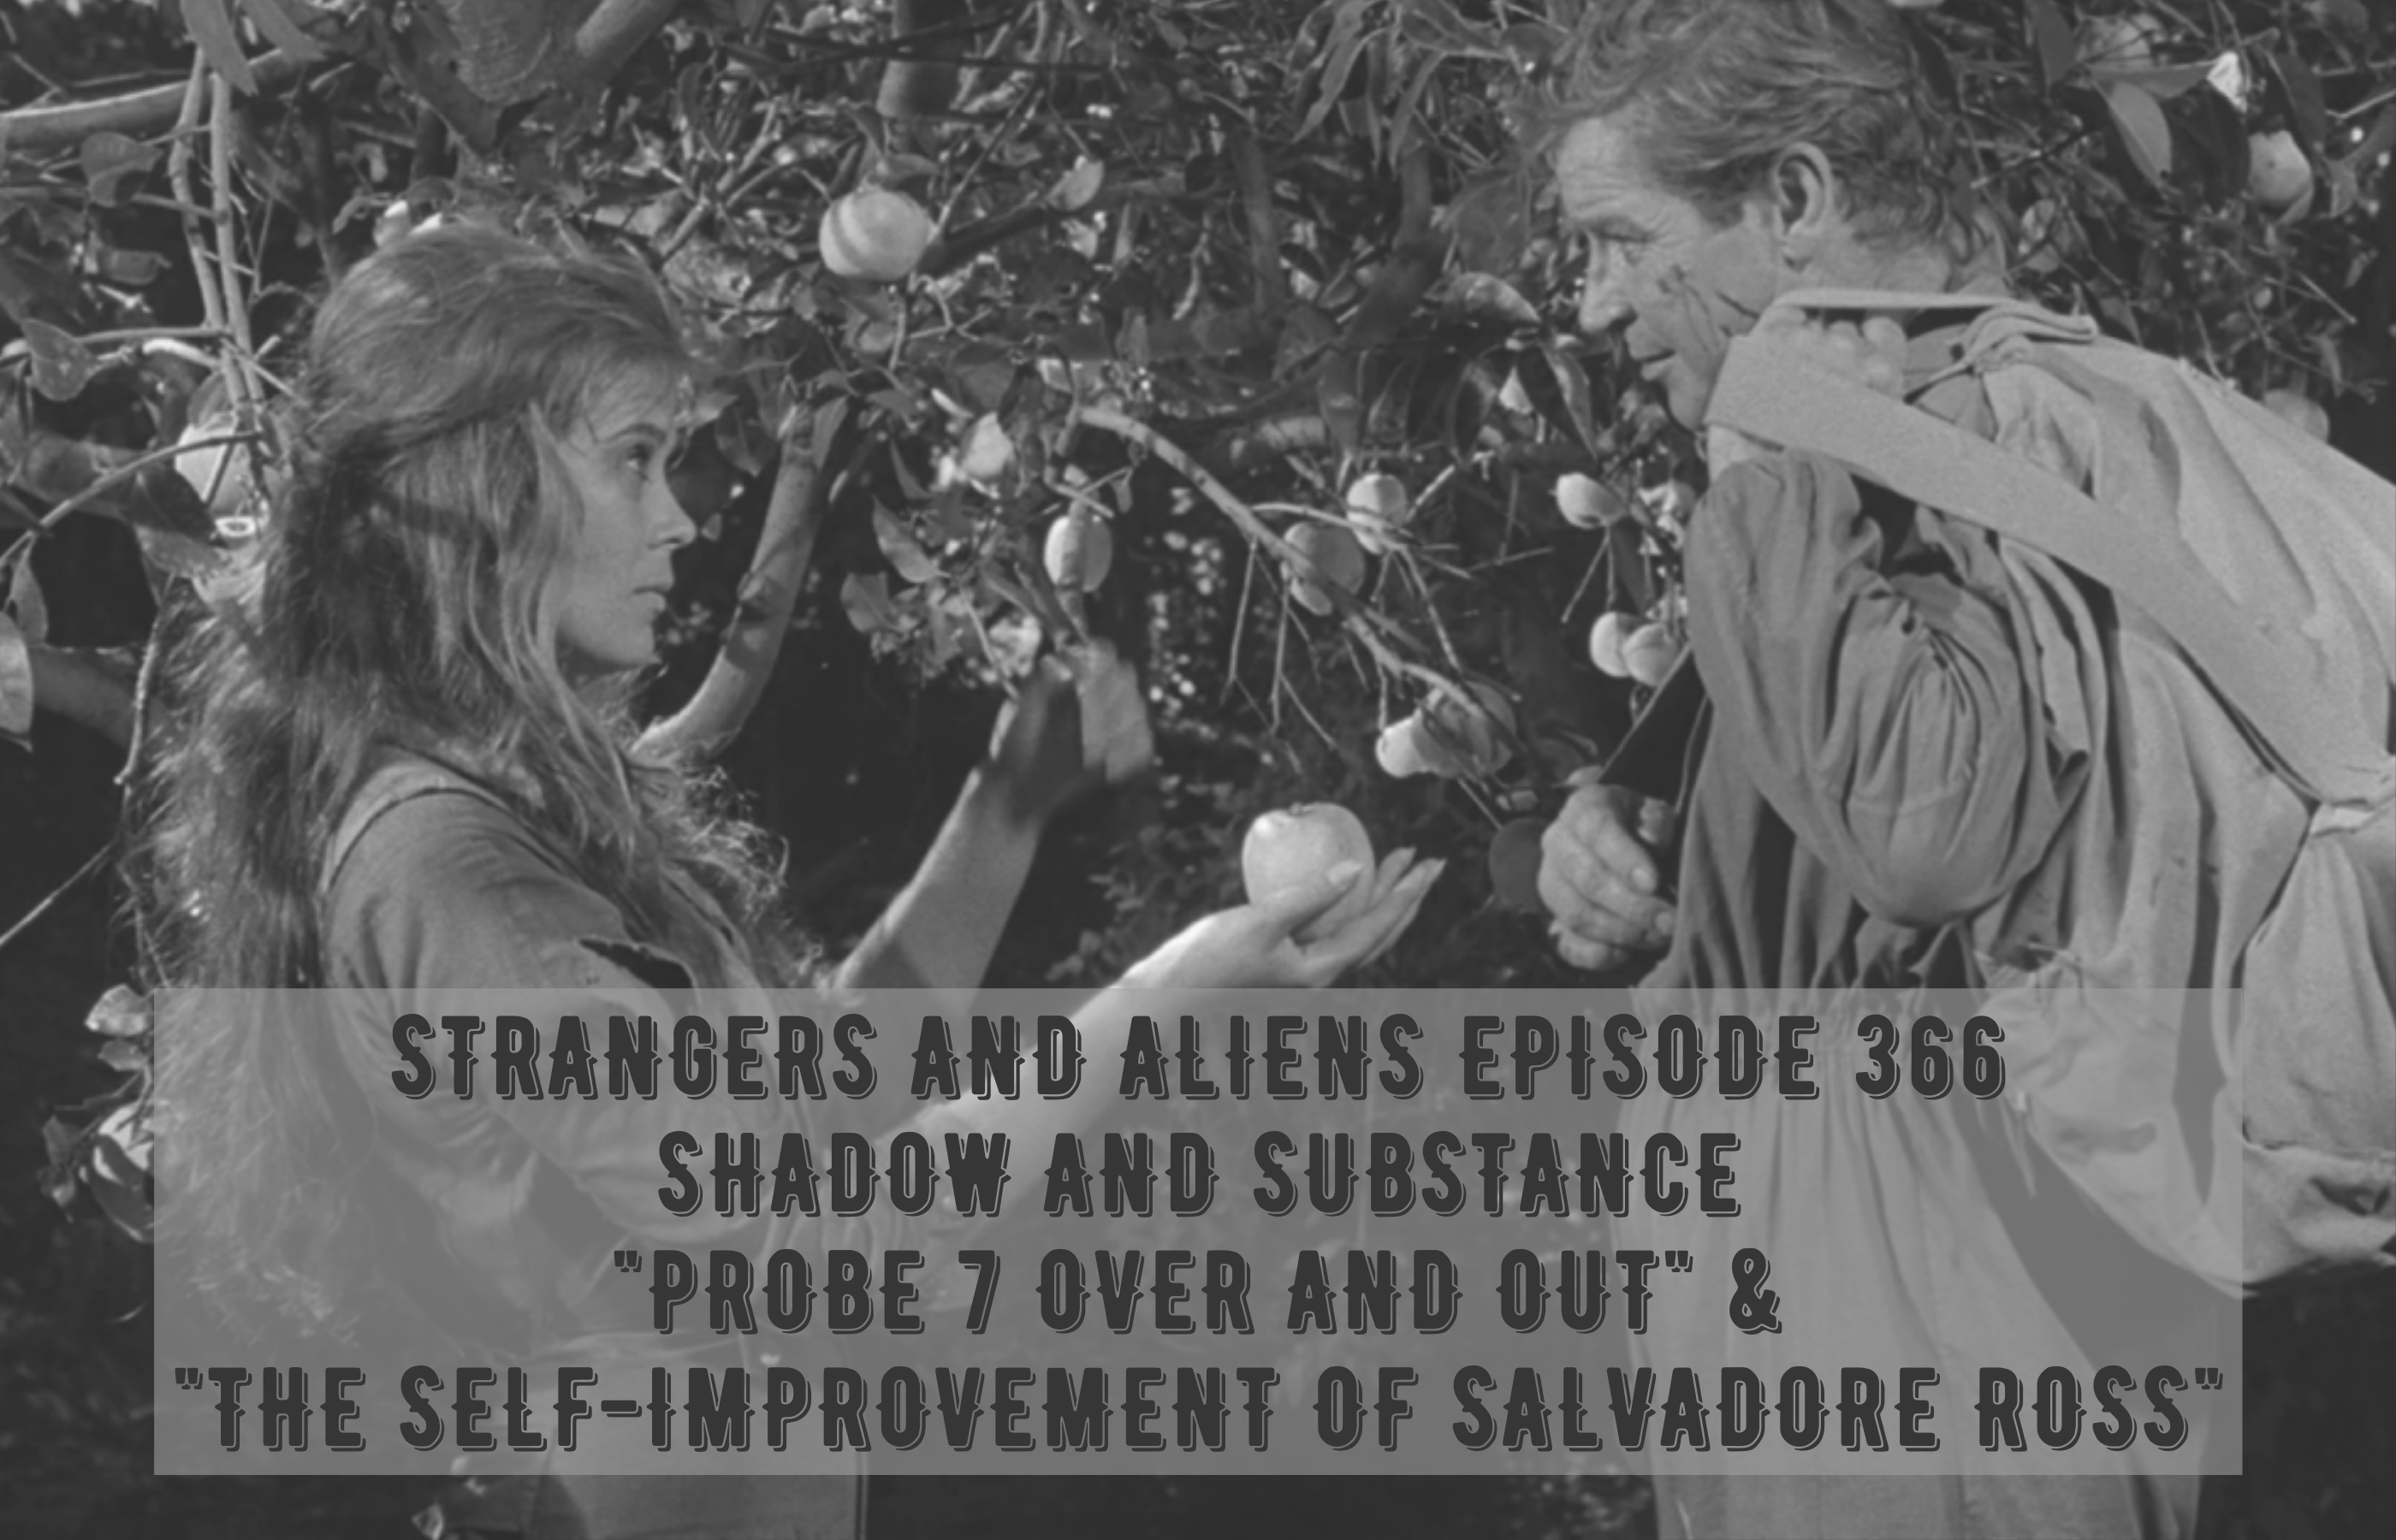 SHADOW and SUBSTANCE 2: “Probe 7 Over and Out” and “The Self-Improvement of Salvadore Ross” – SA366